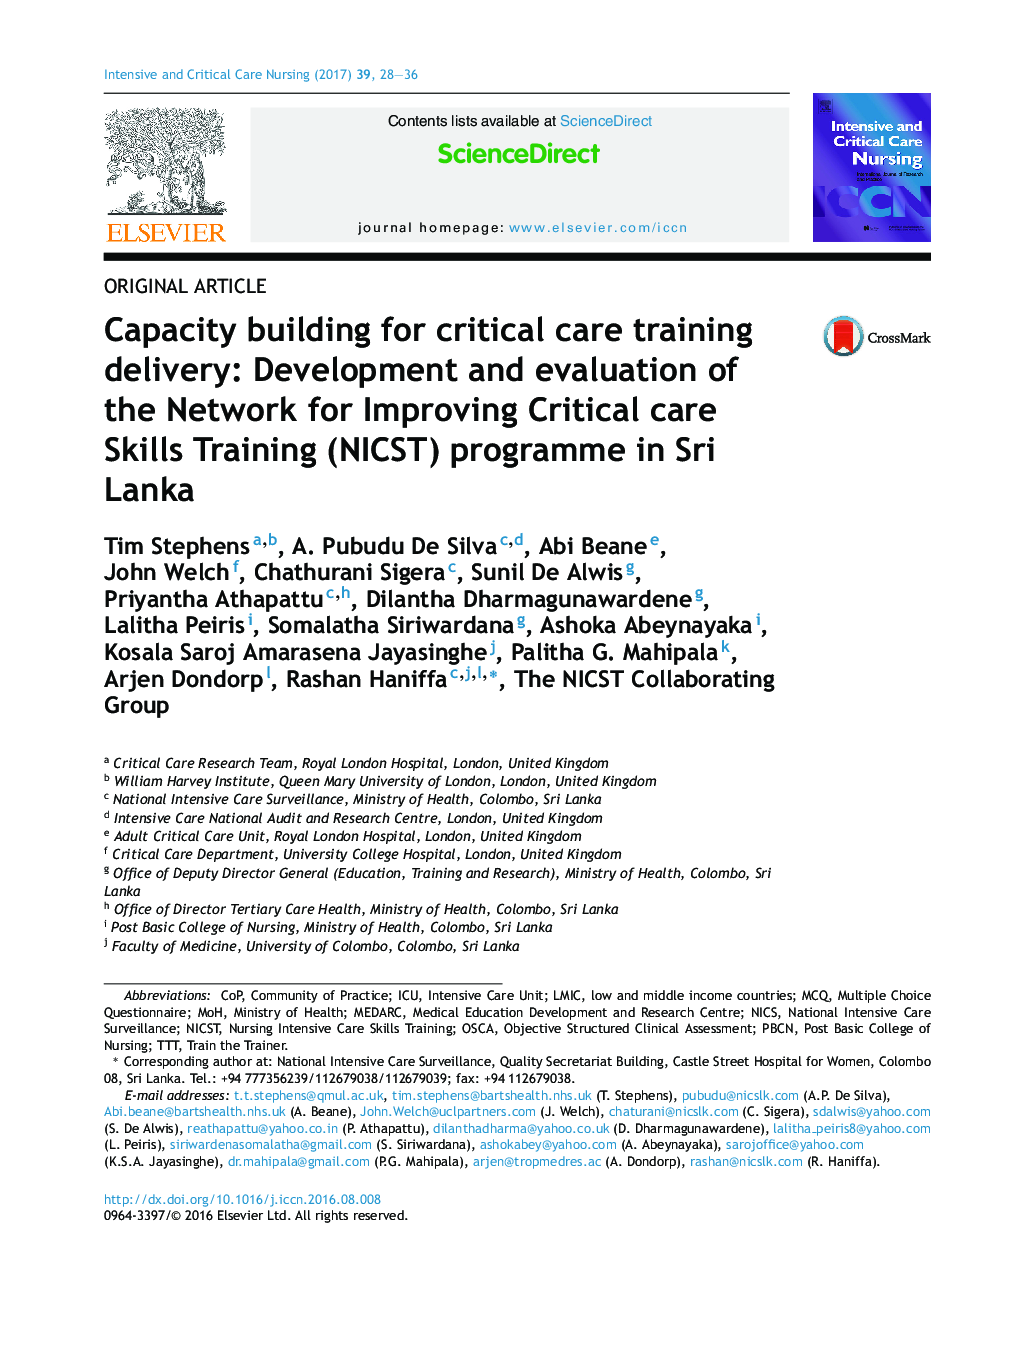 Capacity building for critical care training delivery: Development and evaluation of the Network for Improving Critical care Skills Training (NICST) programme in Sri Lanka